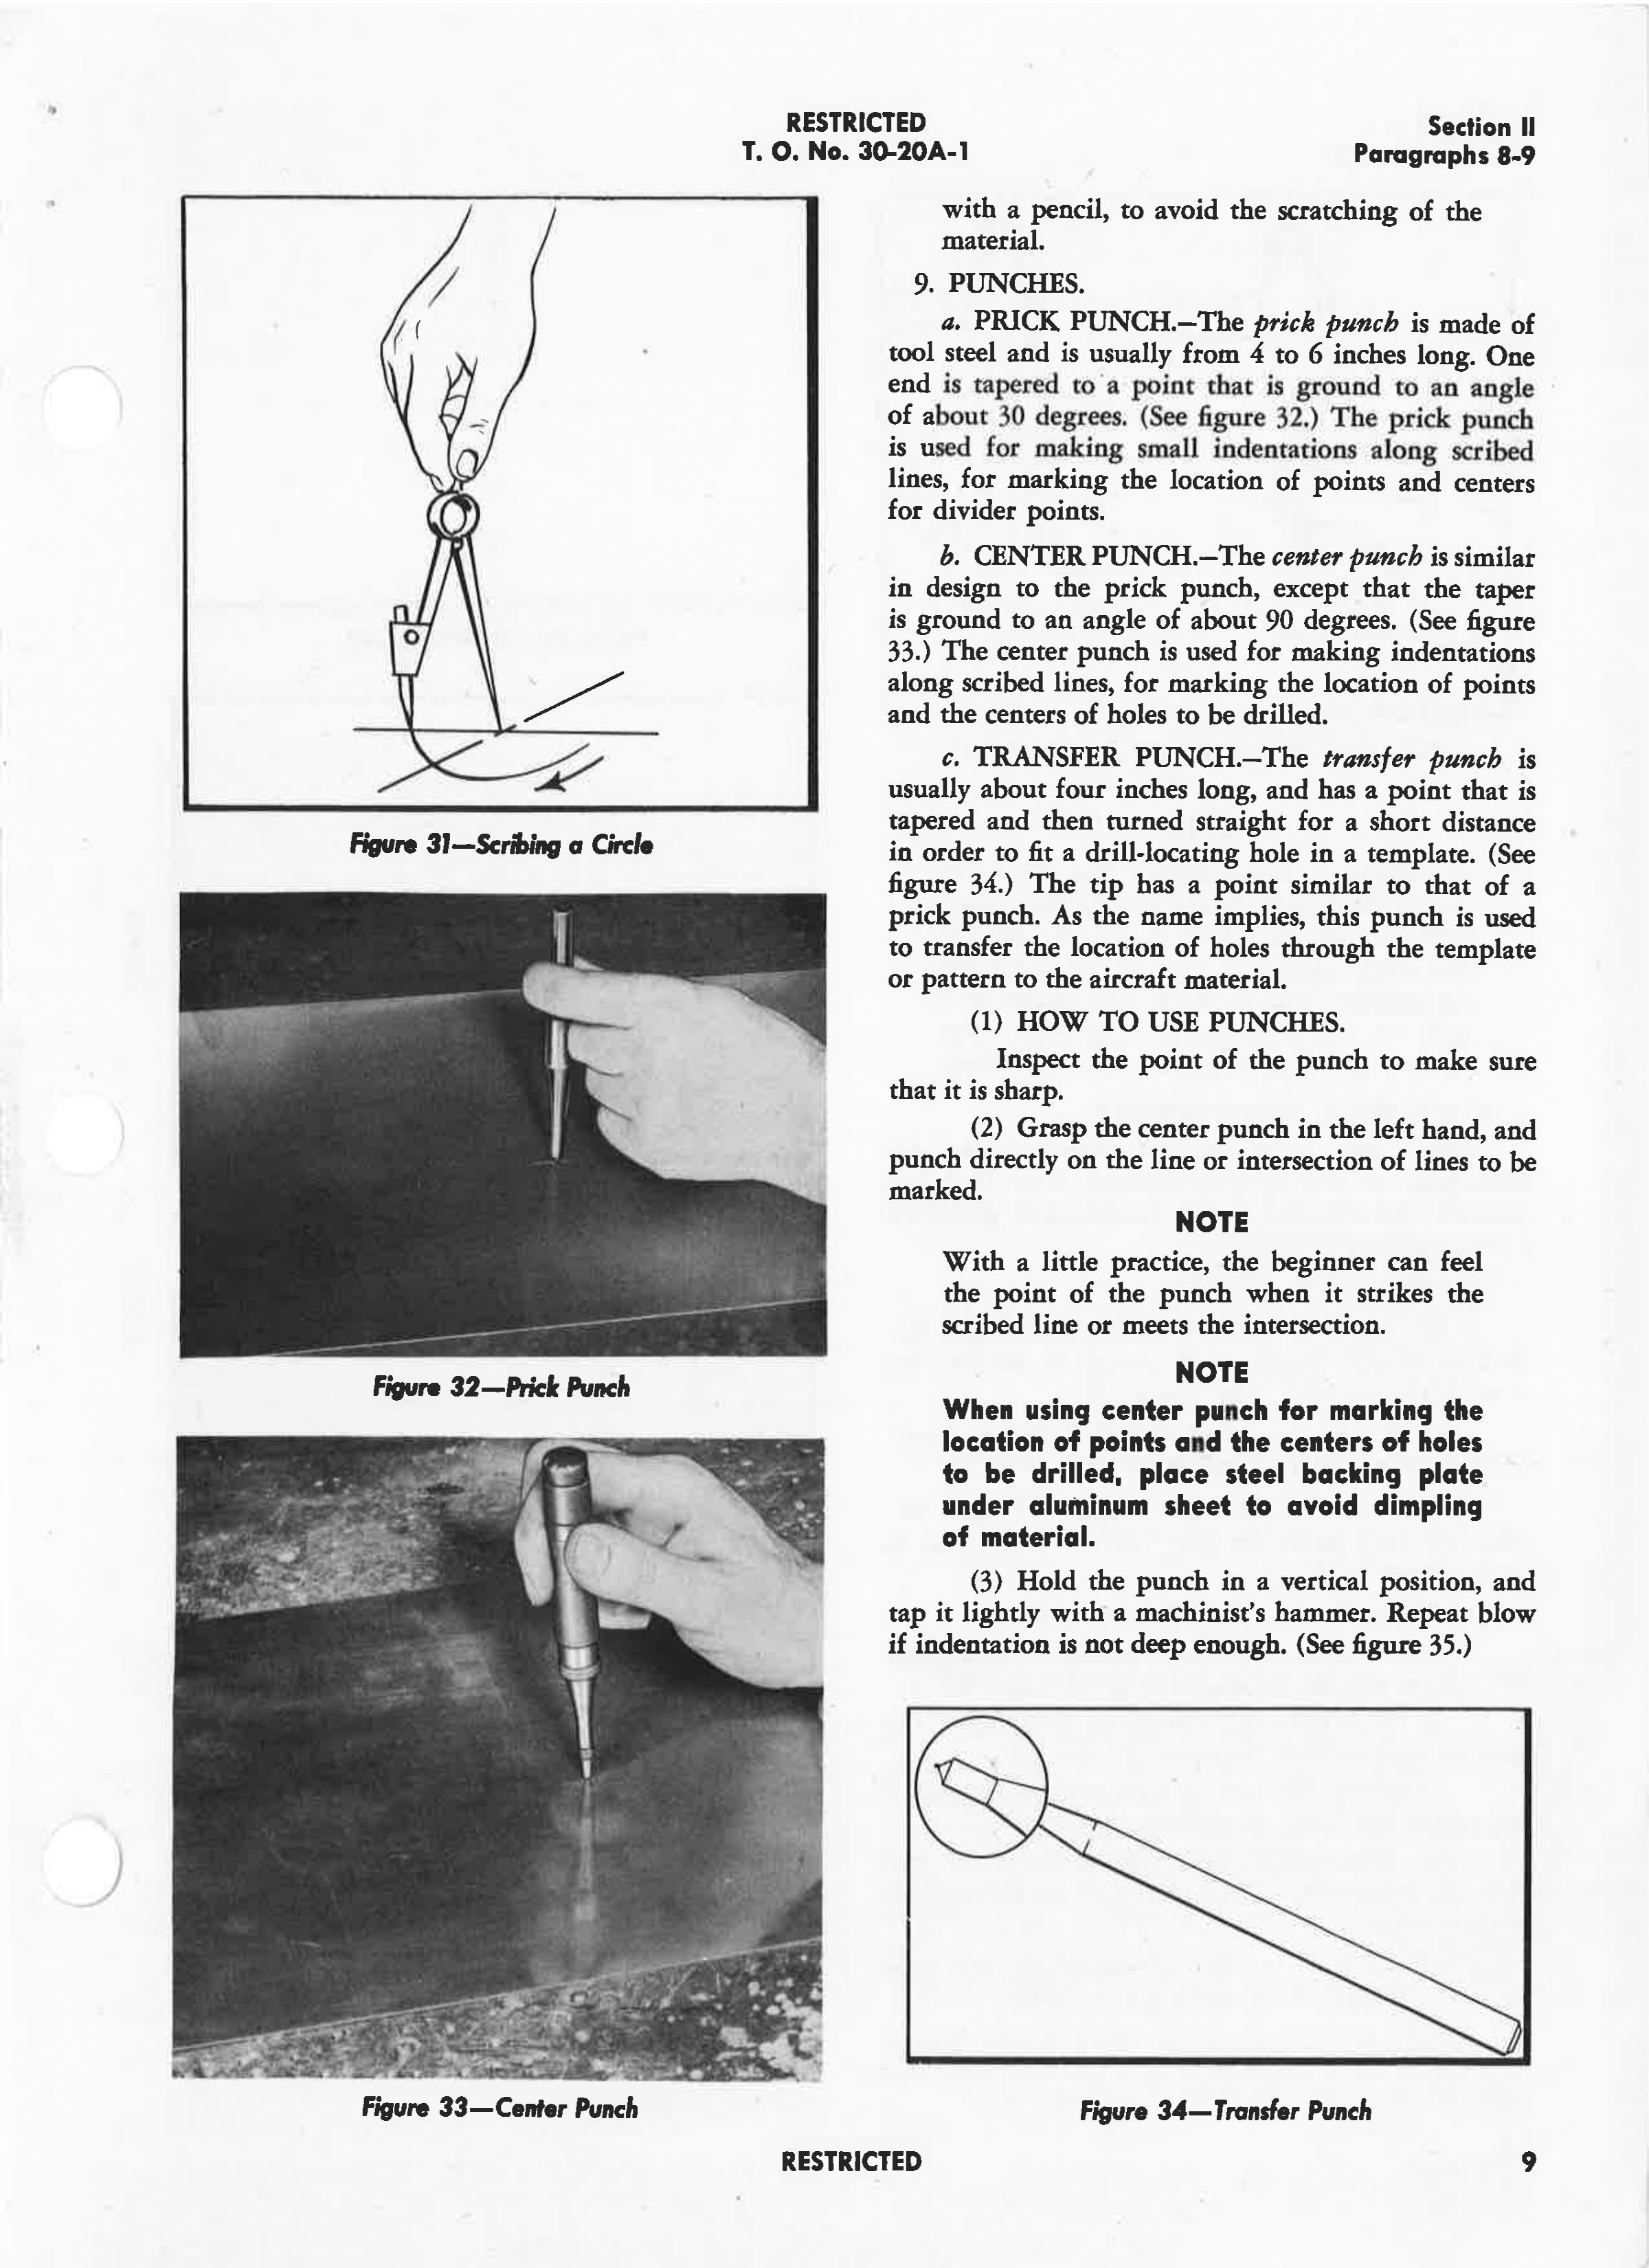 Sample page 13 from AirCorps Library document: Aircraft Sheet Metal Surface Repair Training Guide 